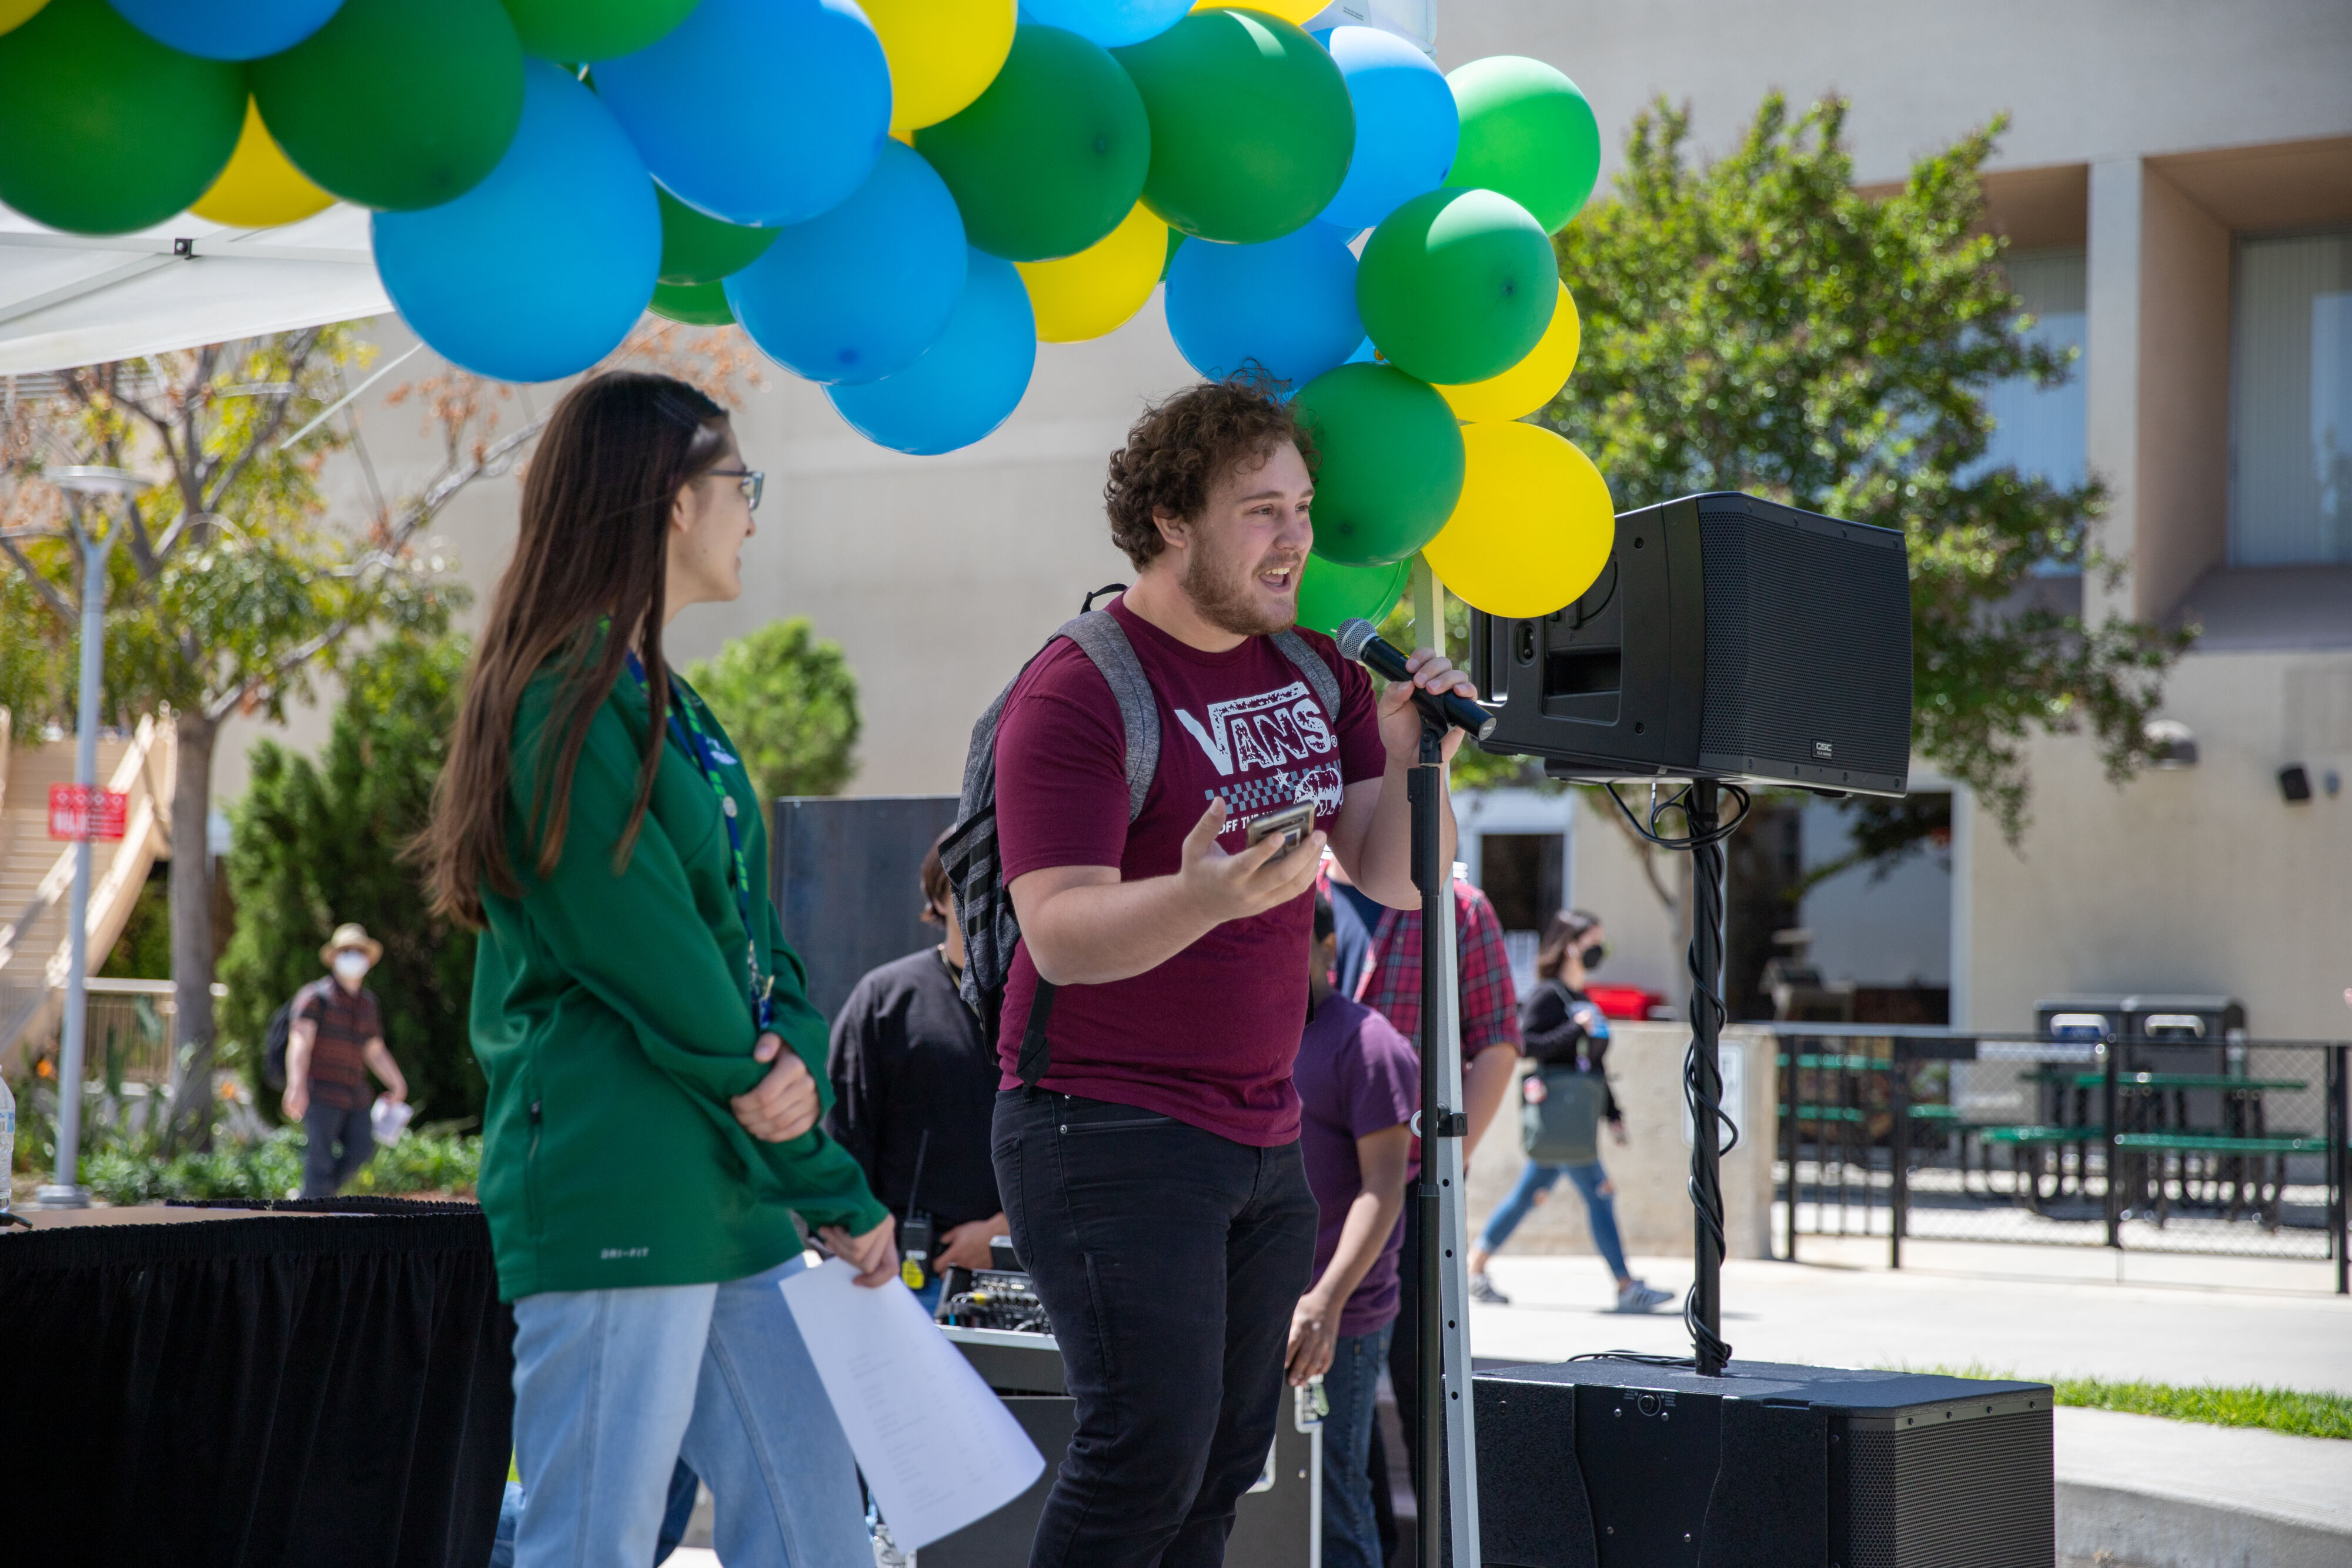 Alt: A student speaking into a microphone on a stage with yellow, green, and blue balloons 